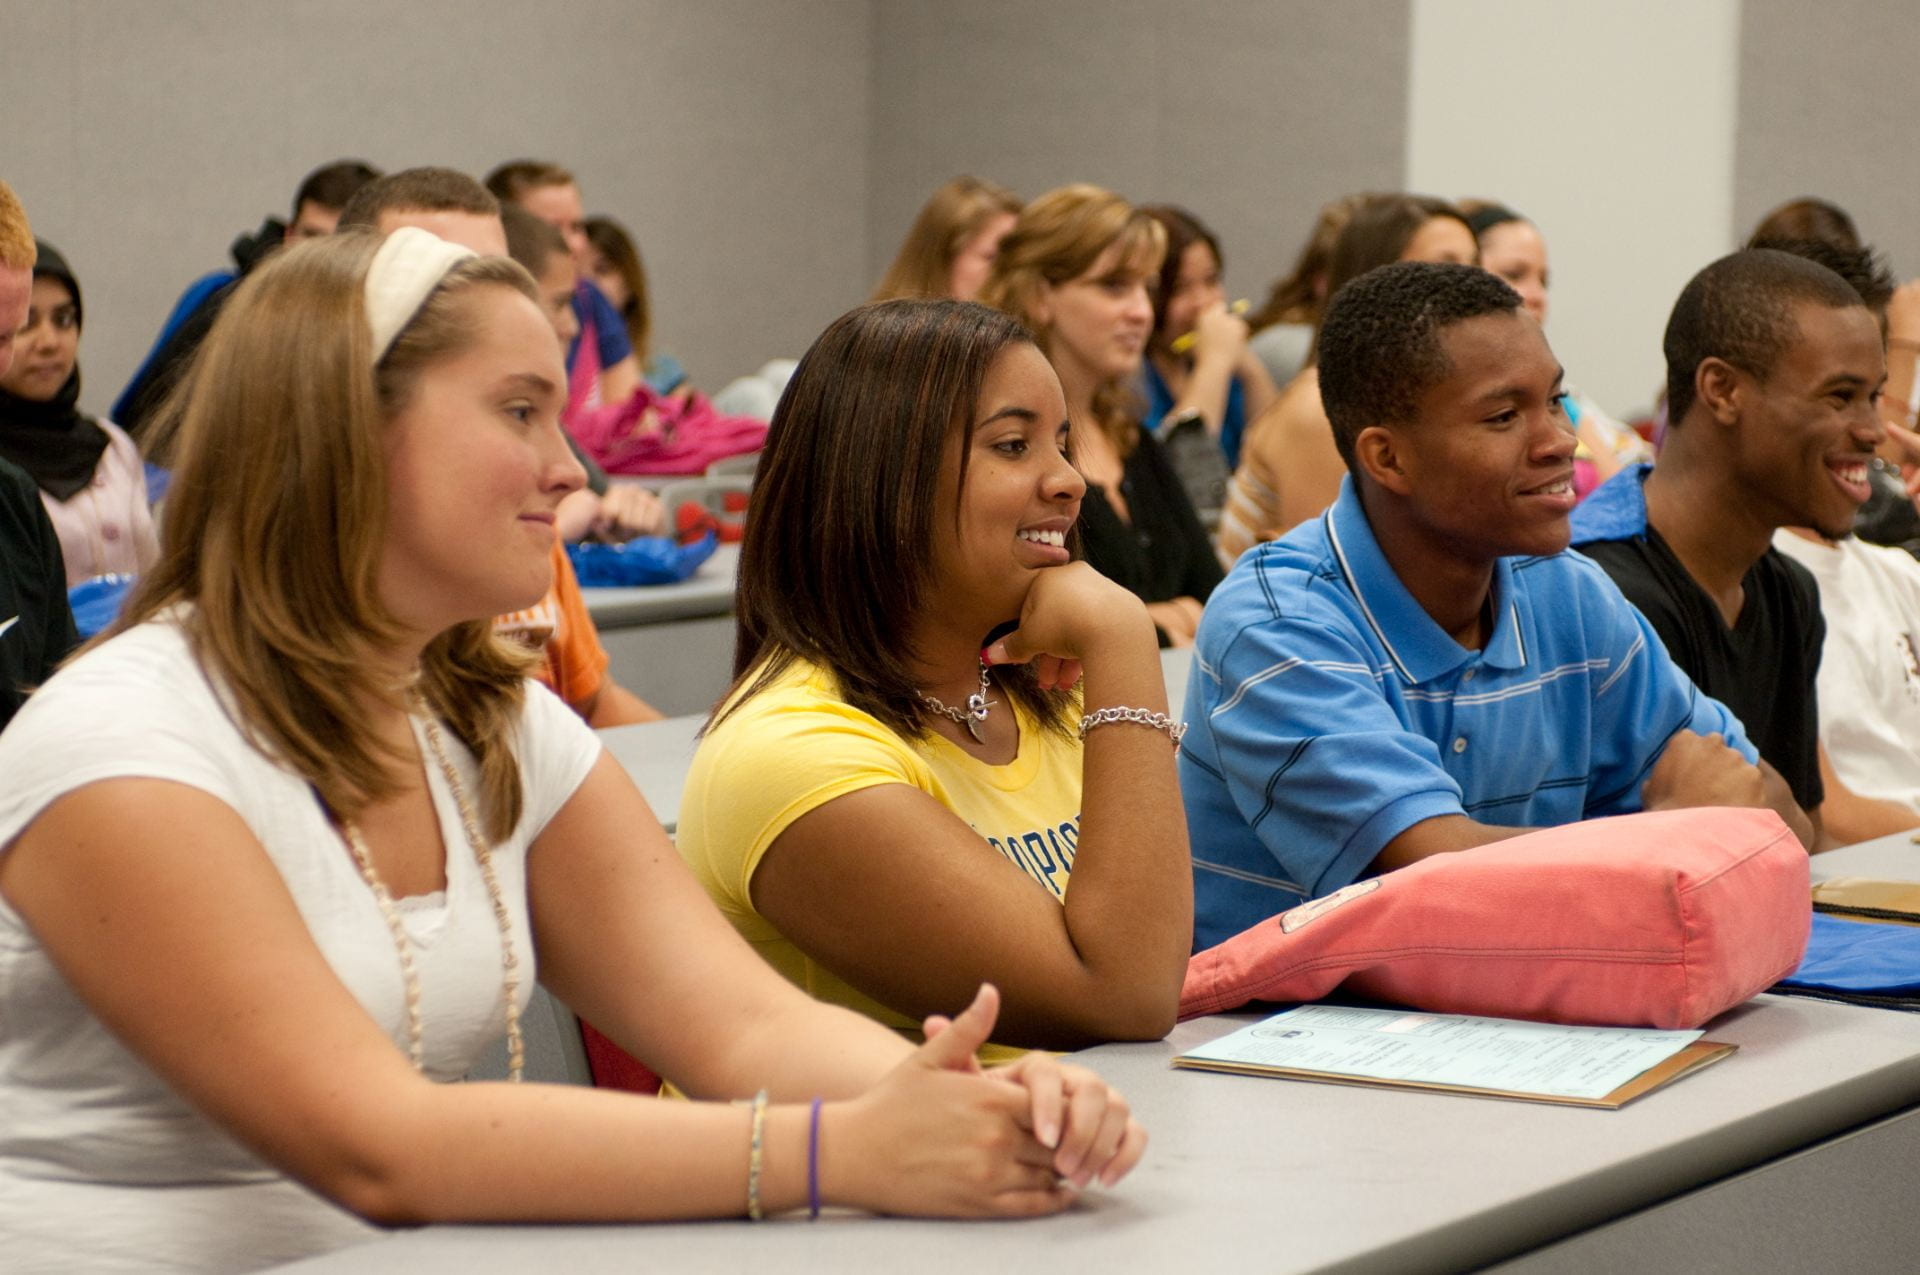 A front angled view of students seated in a classroom paying attention to a lecture.